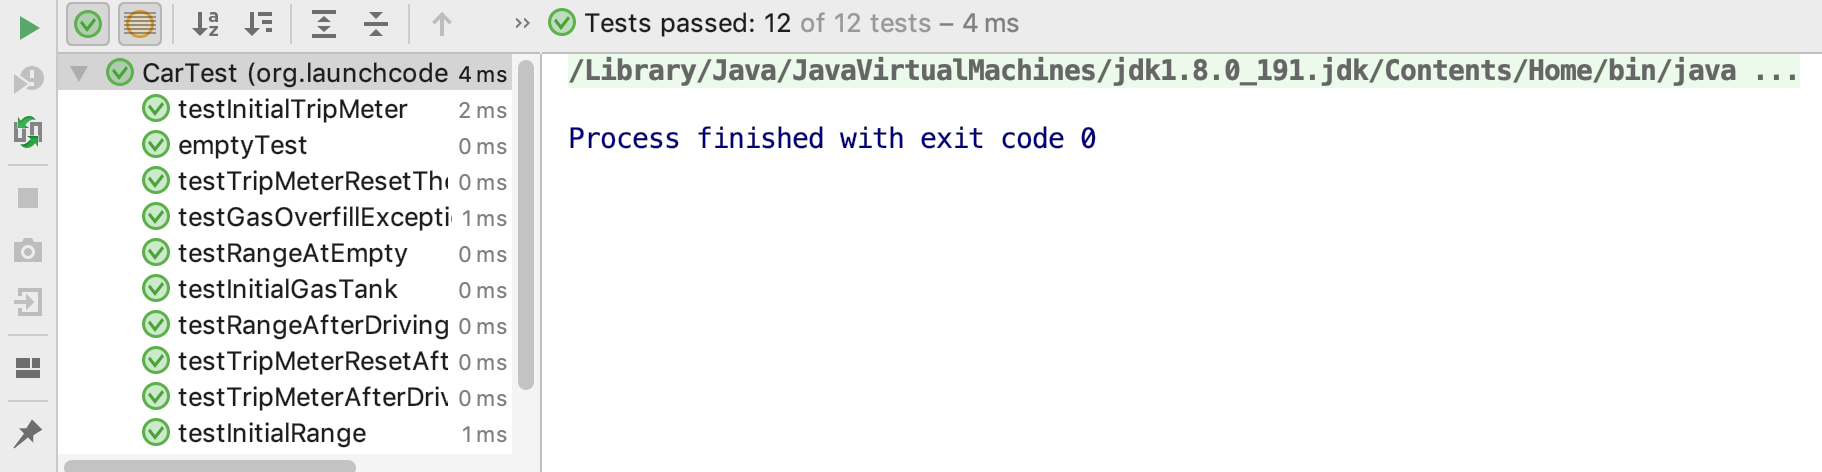 ../../_images/tdd-successful-tests.png